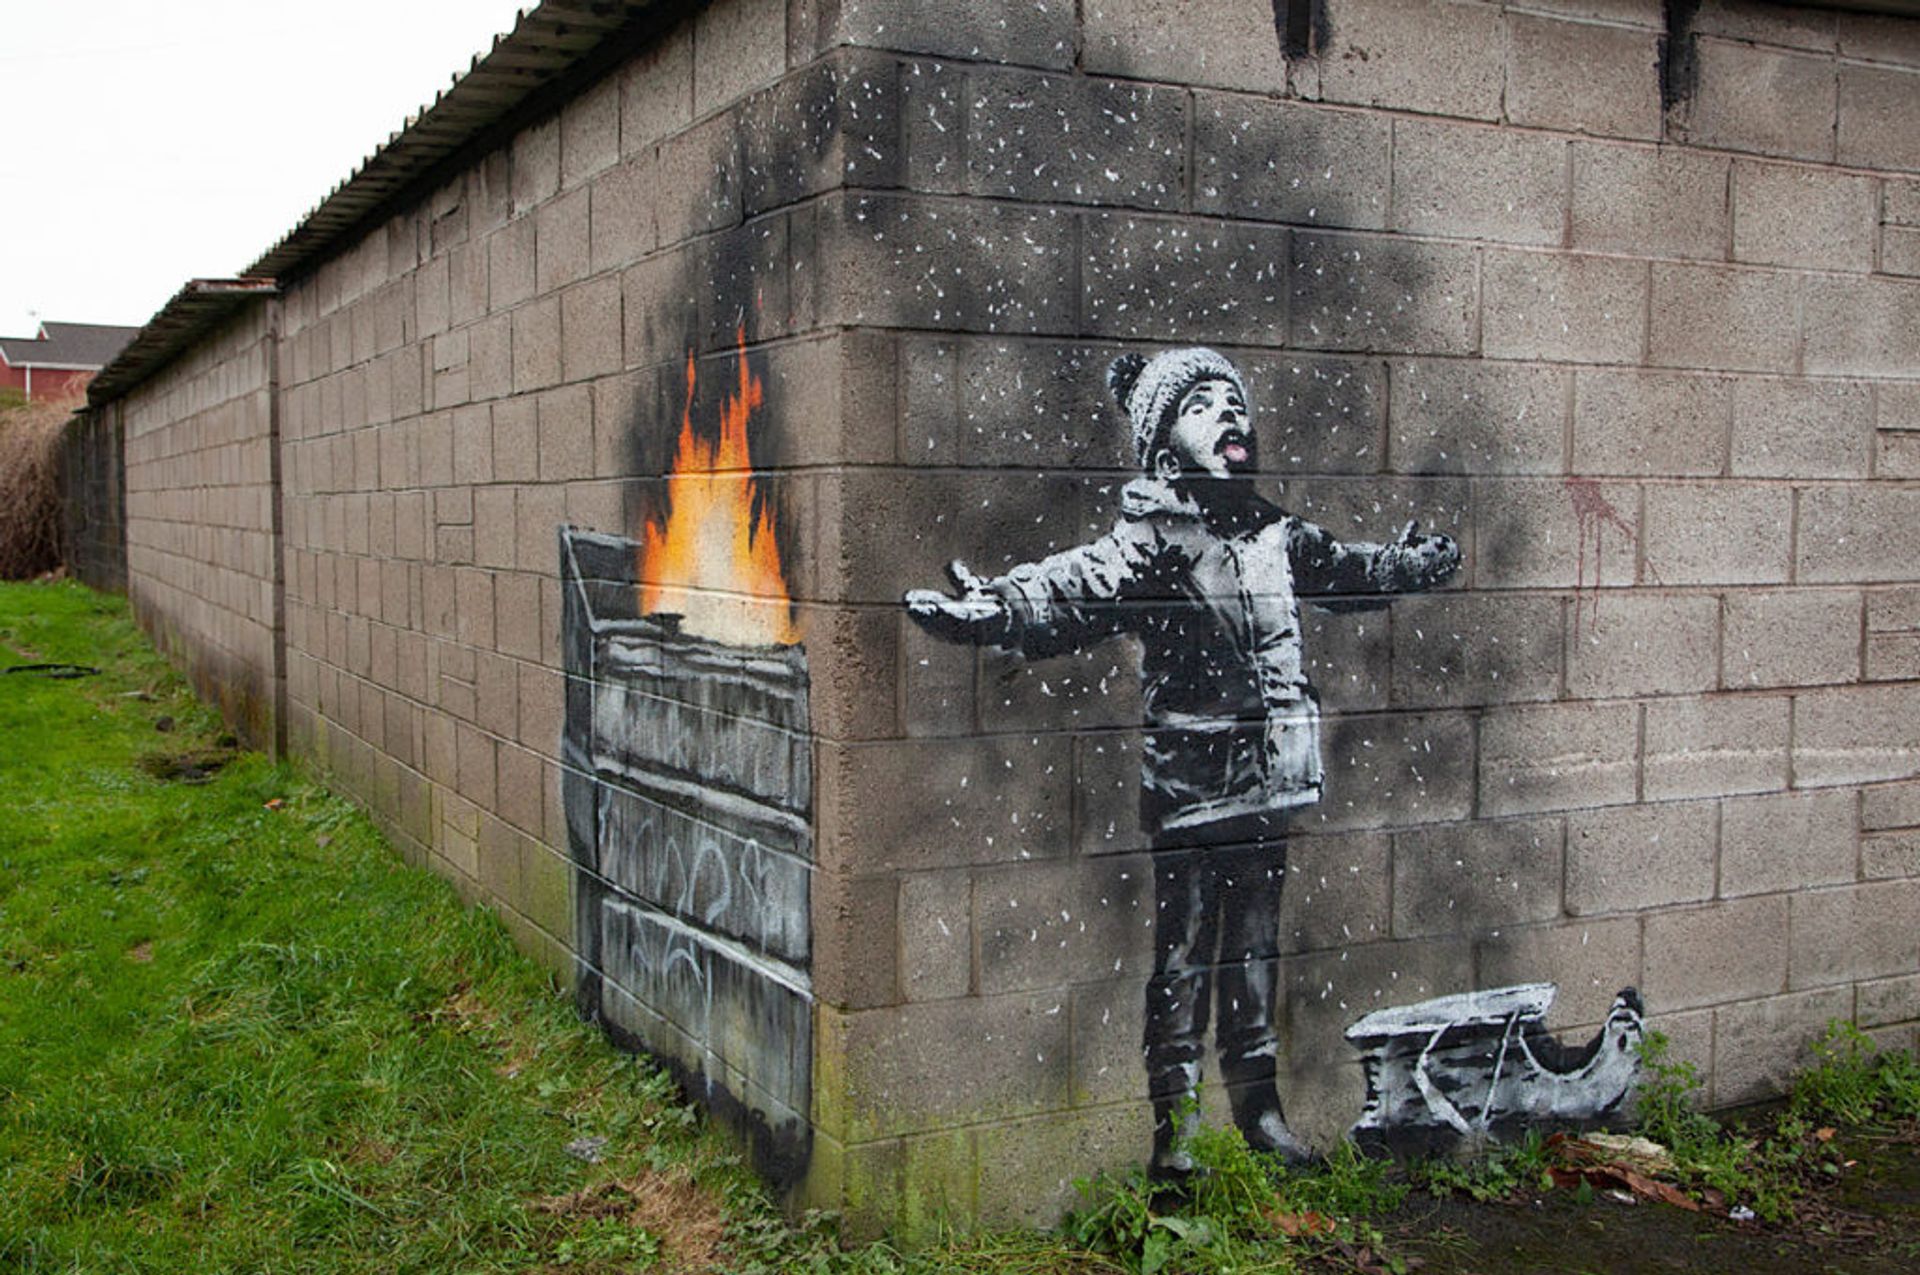 Banksy's Season's Greetings (2018) has been removed from Port Talbot, Wales. Courtesy of the artist